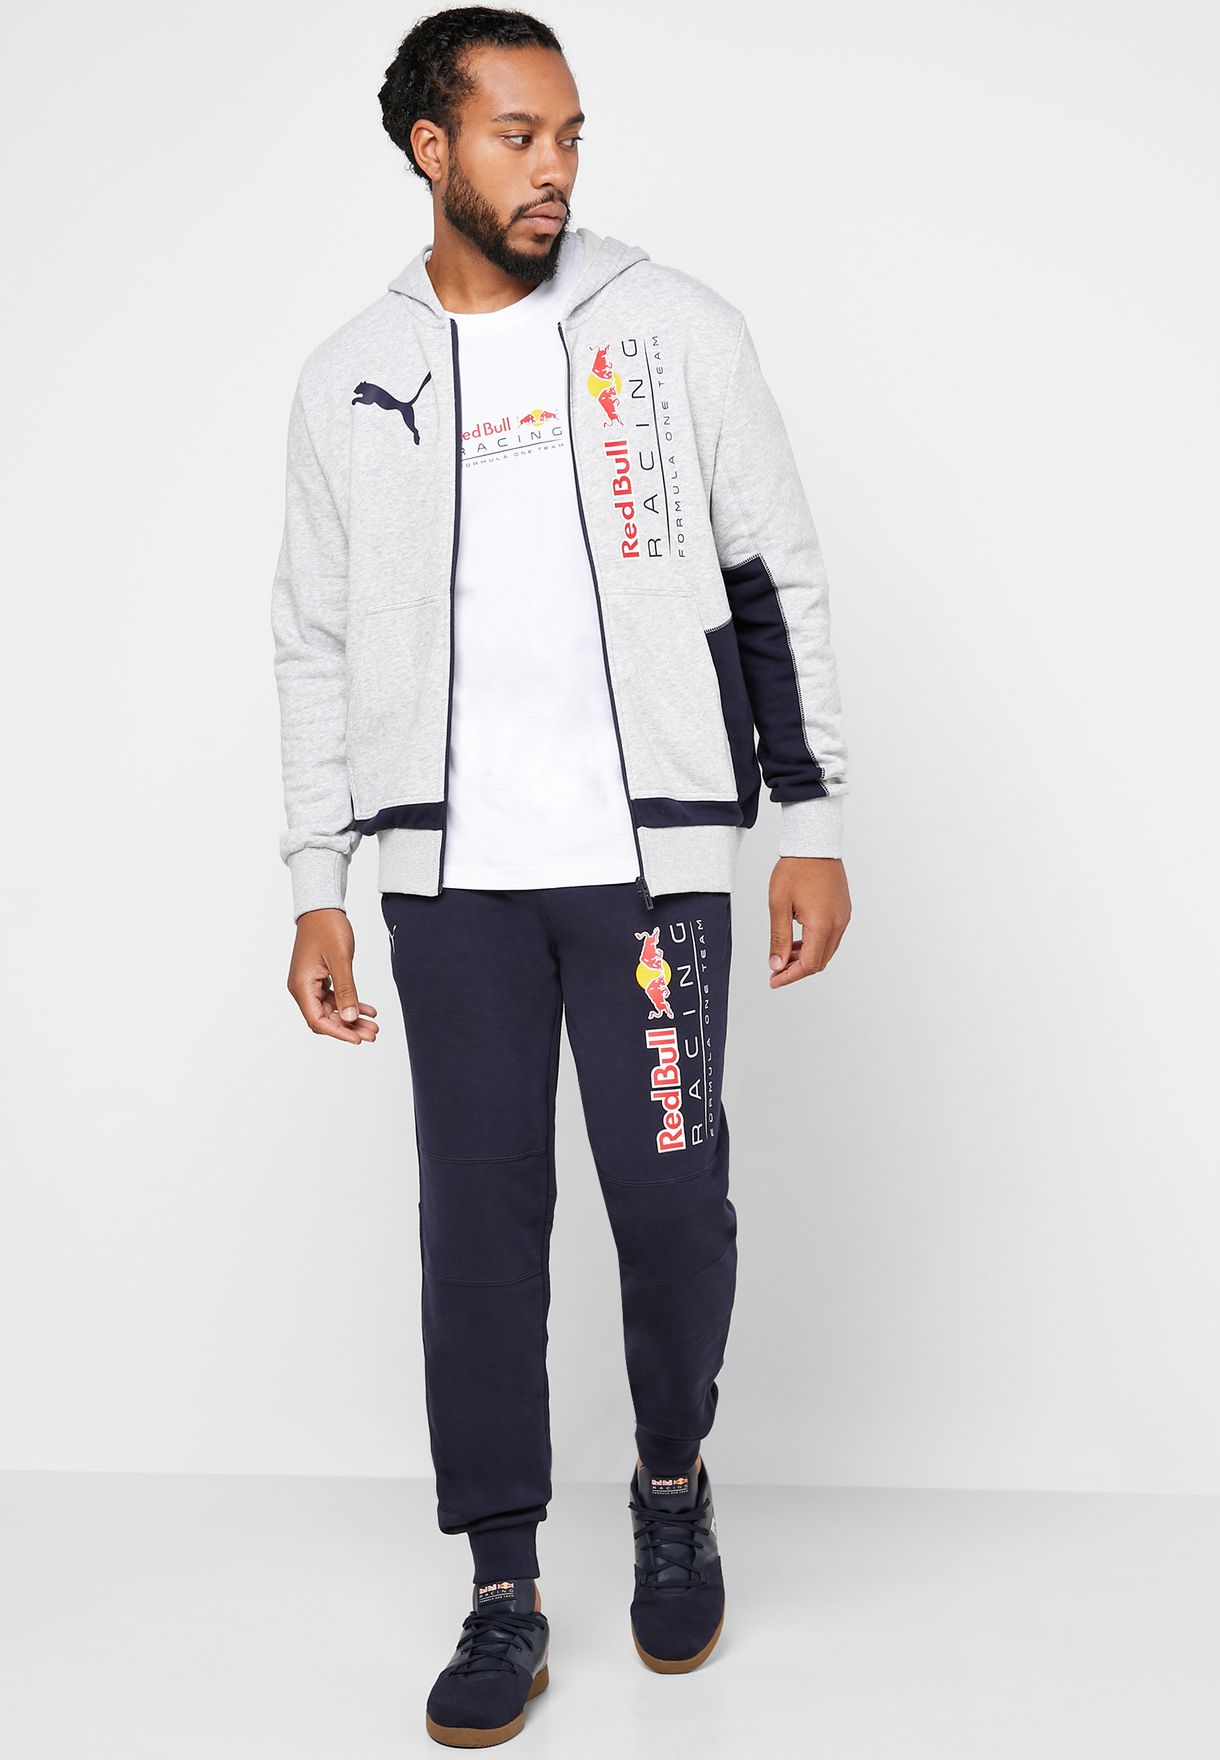 red bull tracksuit